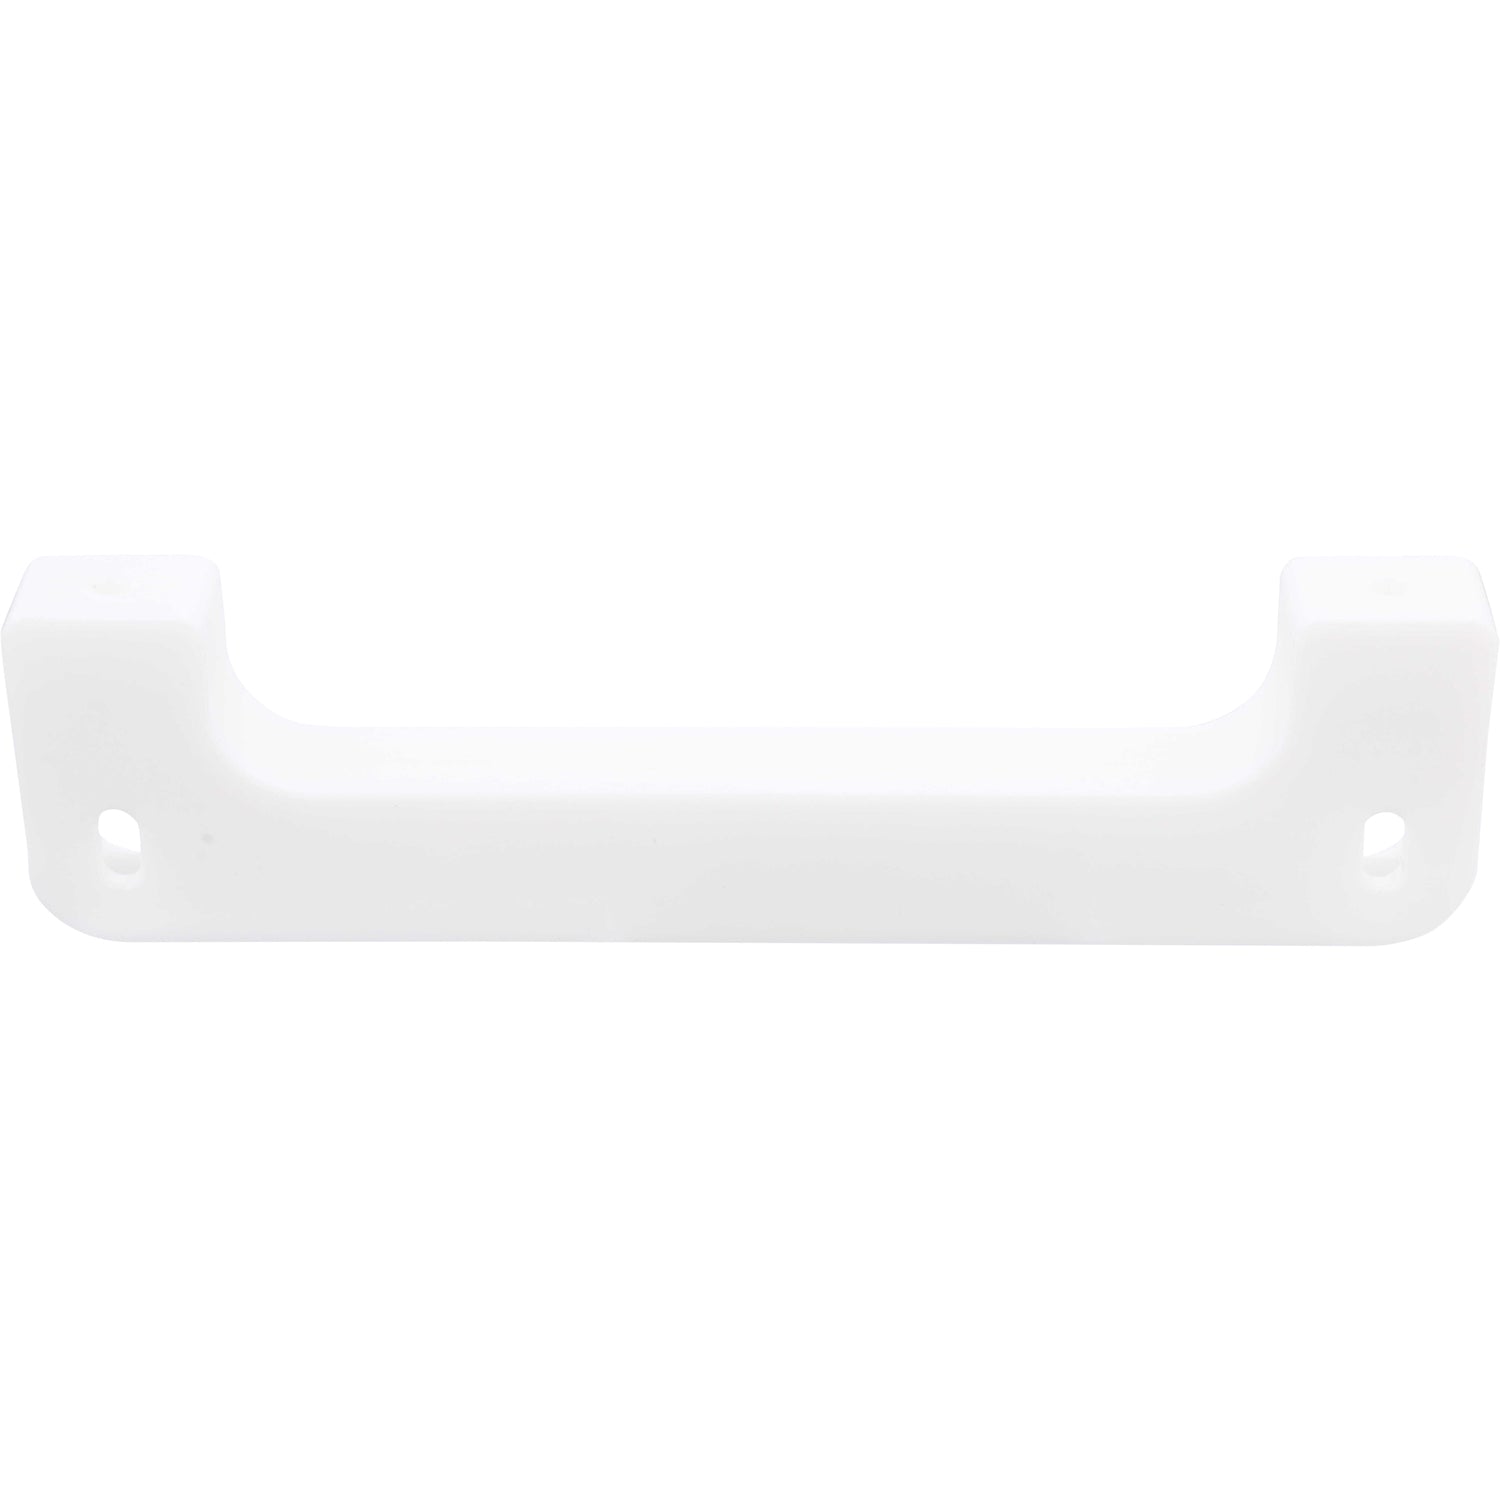 White plastic mounting bracket shaped like a shallow U with two holes used for mounting. Shown on  white background. 